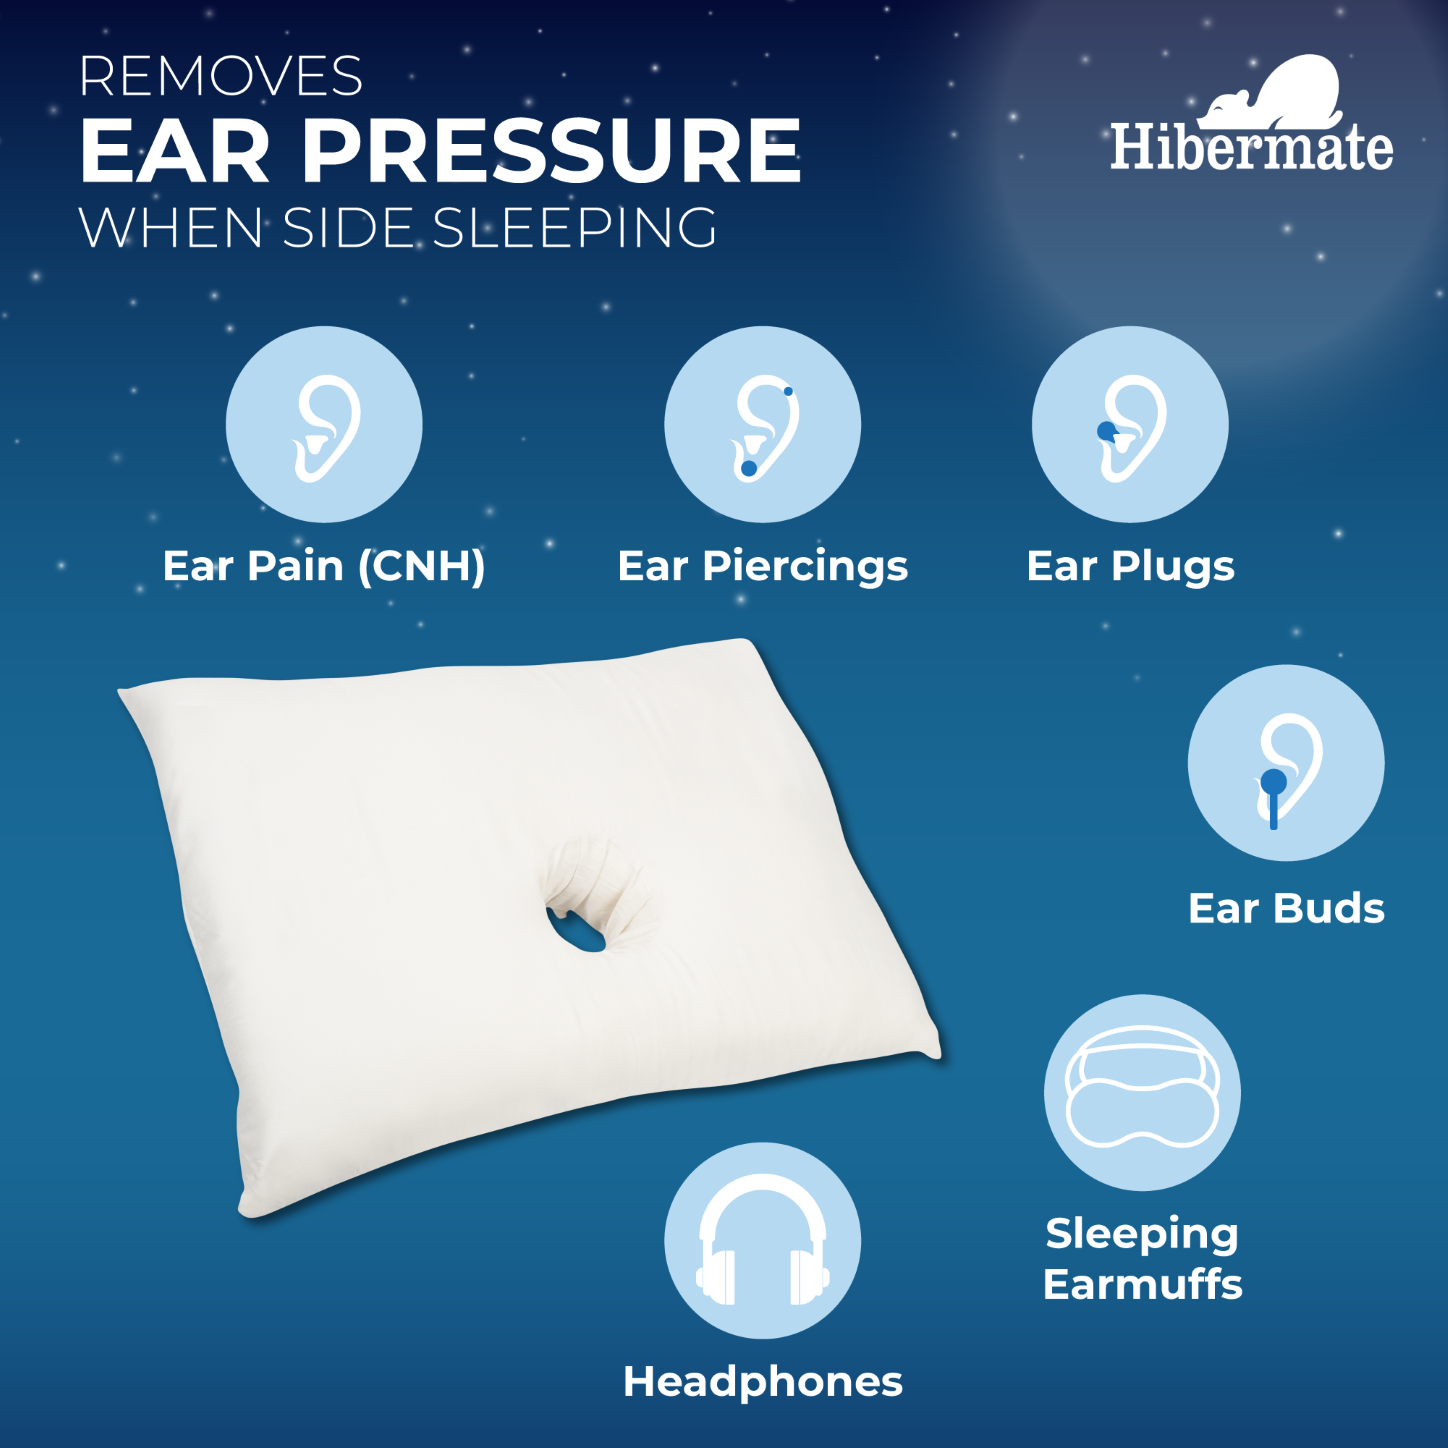 Hibermate Ear Pillow for reducing ear pressure and ear pain while sleeping